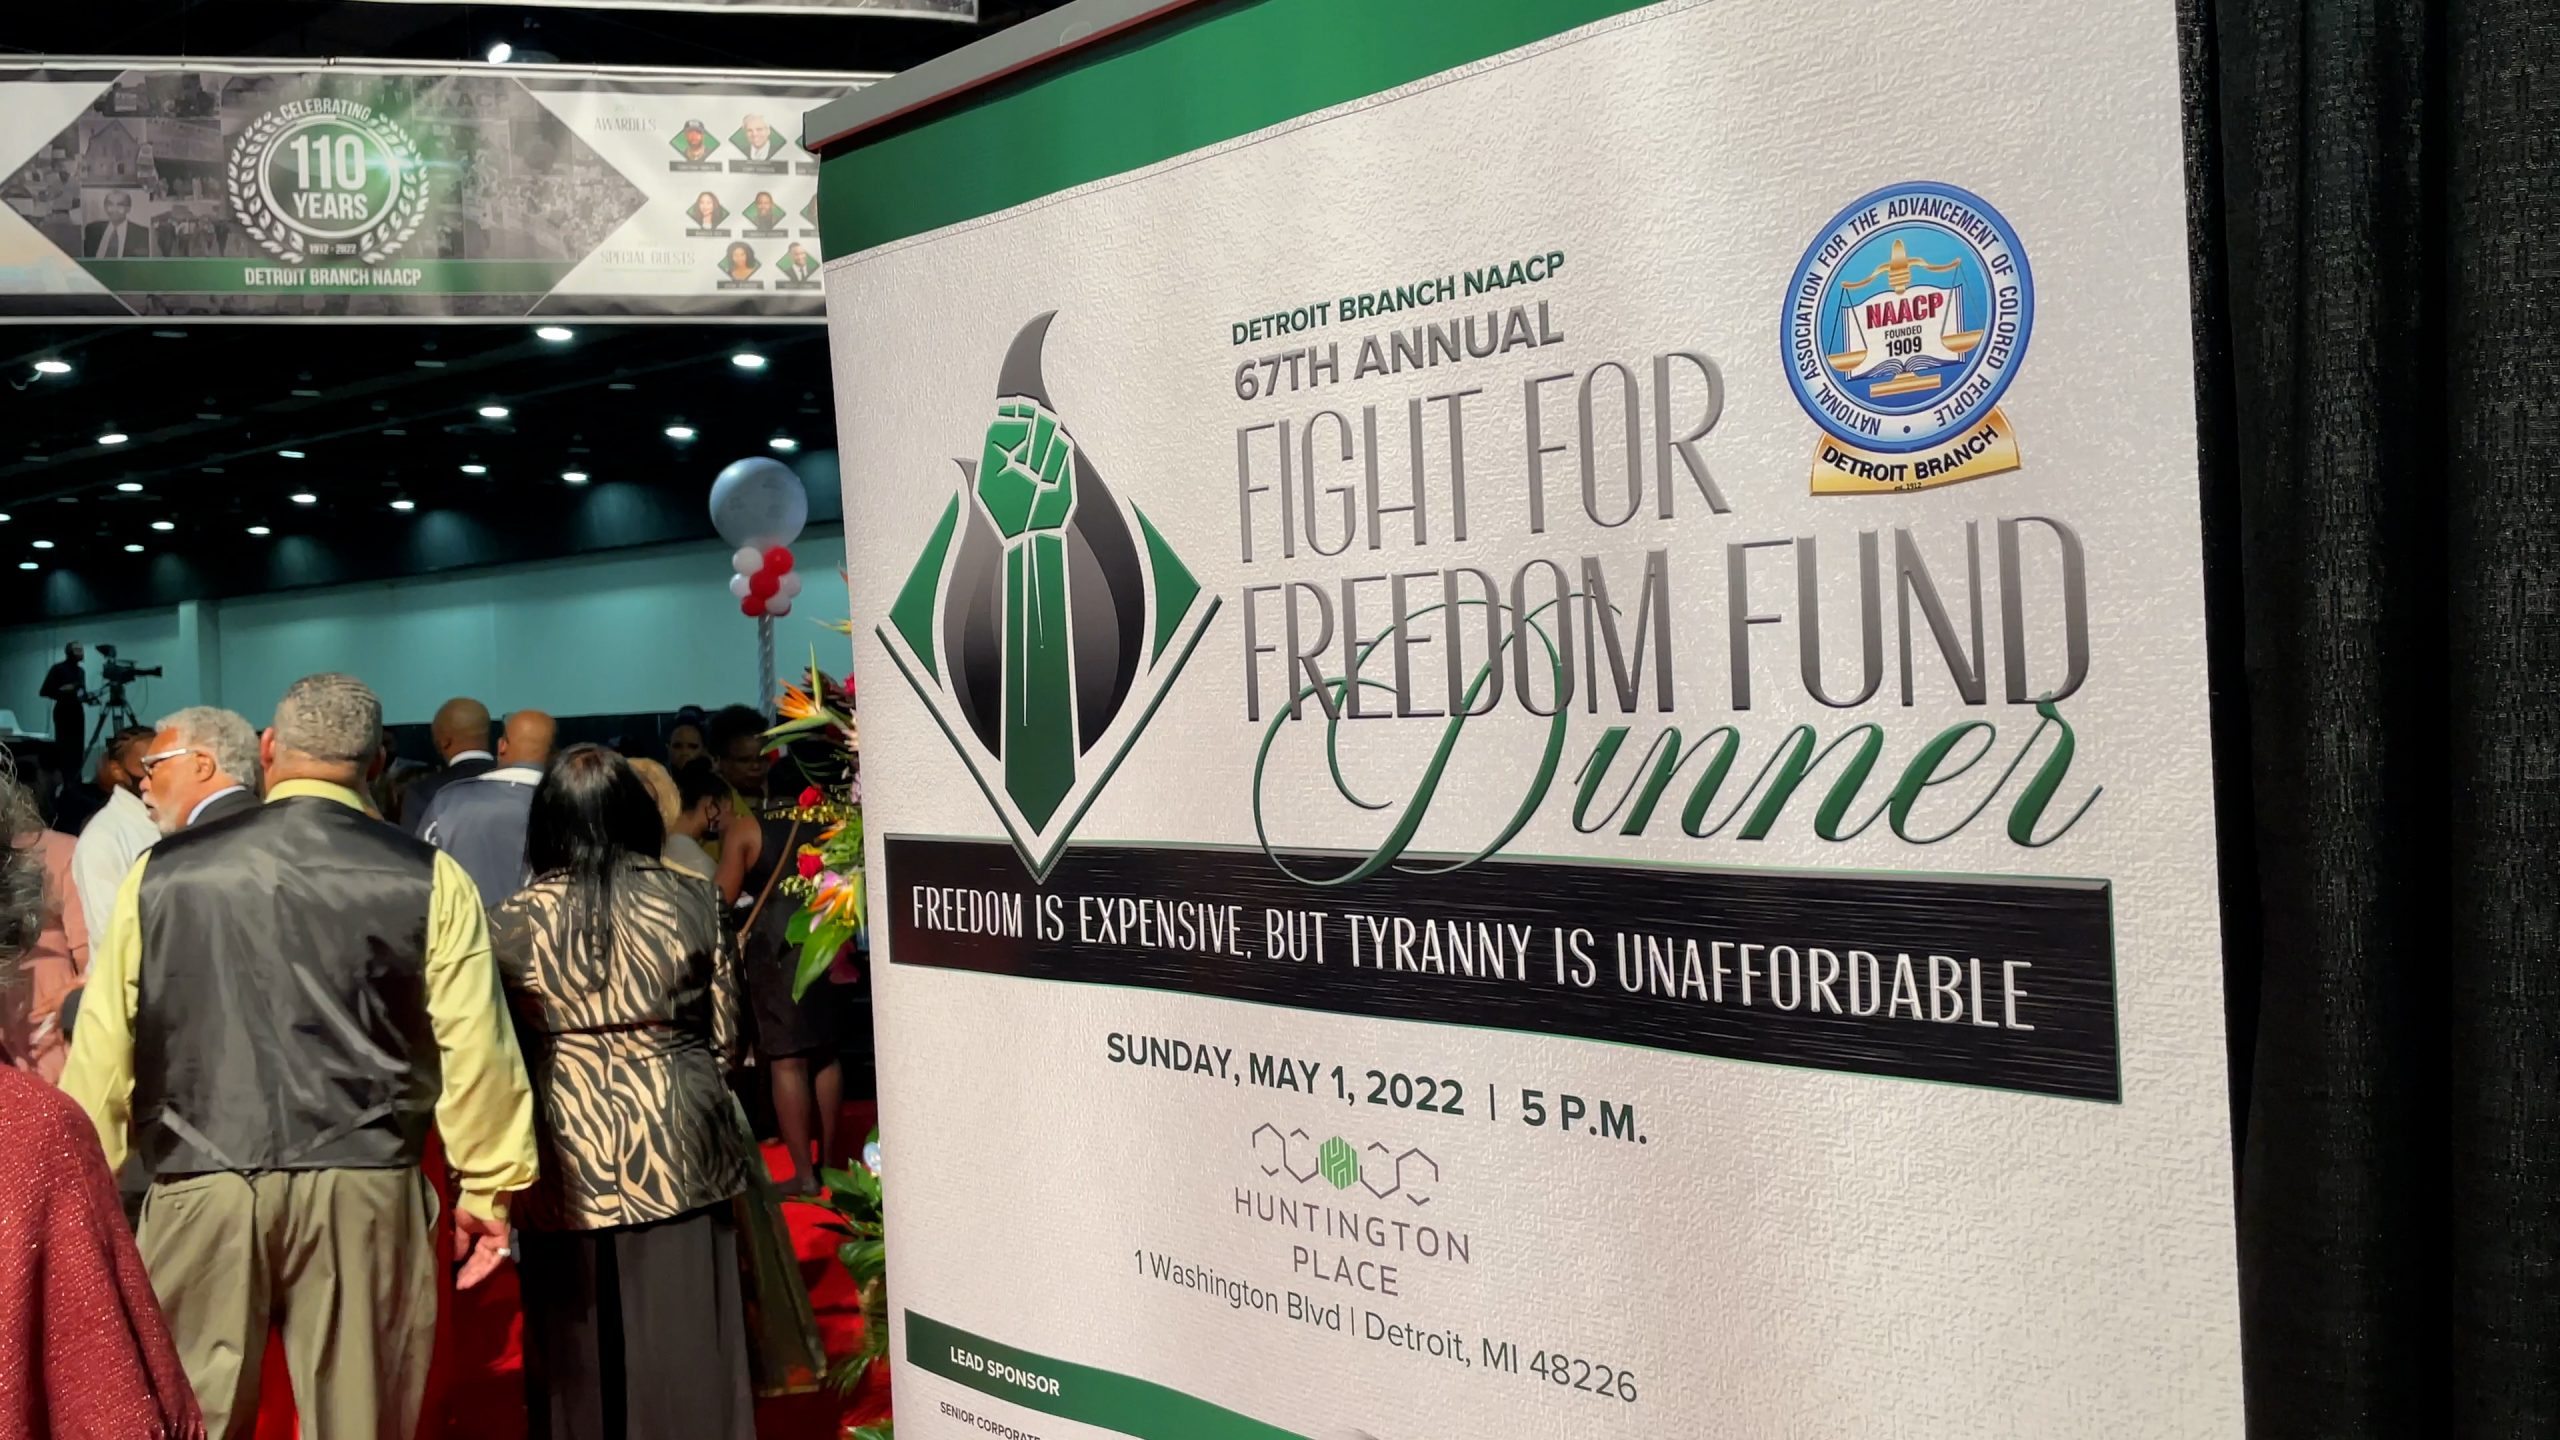 Detroit Branch NAACP Celebrates 67th Annual Fight for Freedom Fund